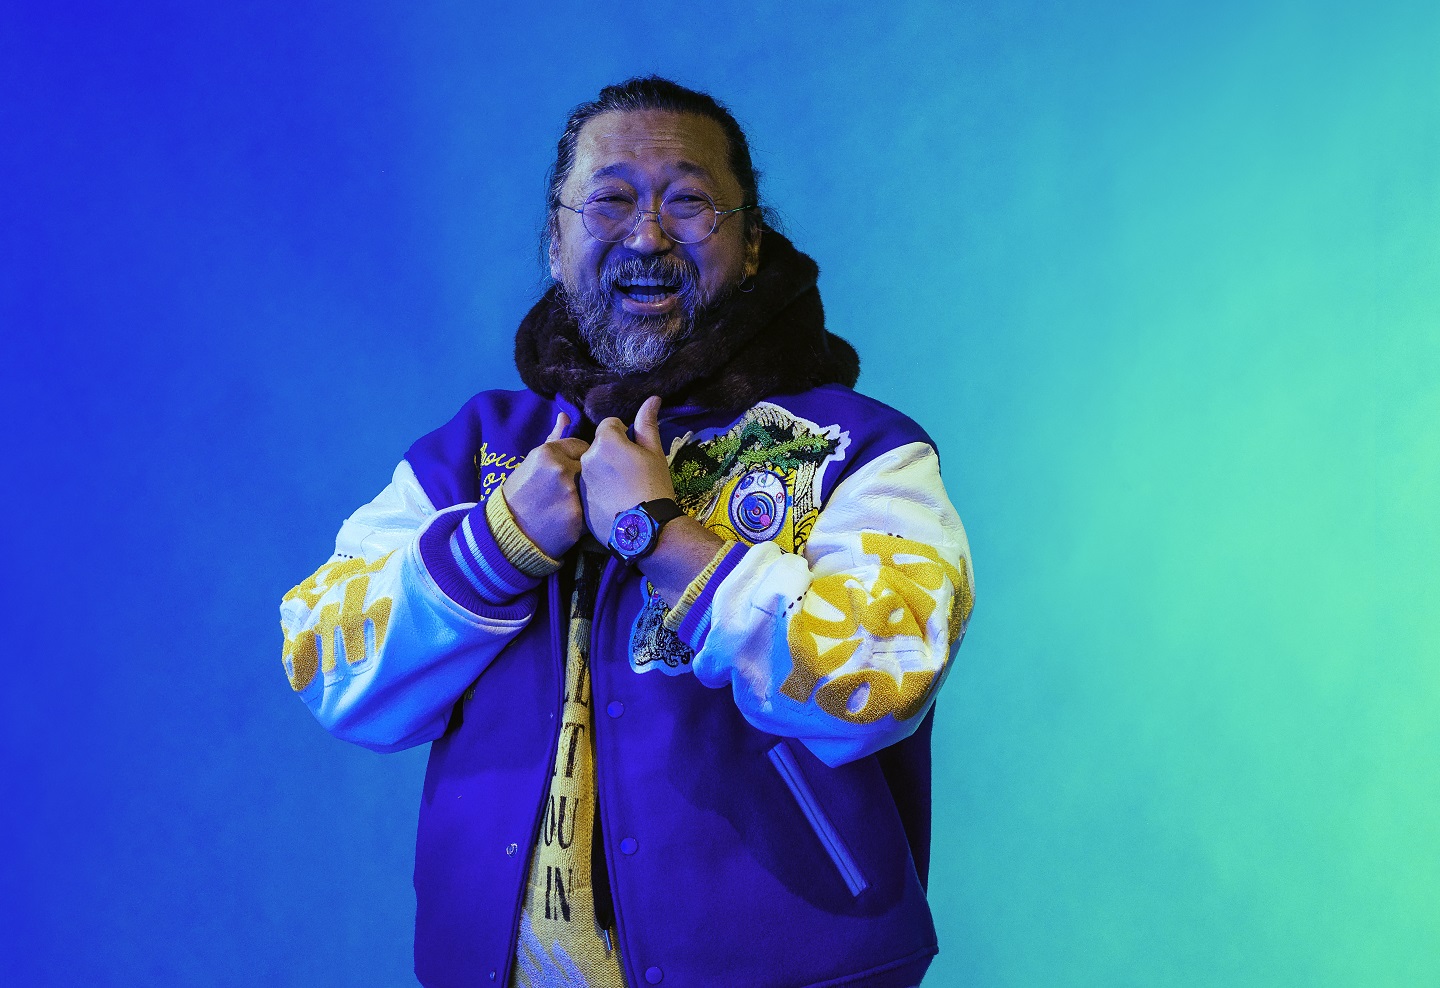 Takashi Murakami collaborates with Swiss watchmaker Hublot on a luxury  watch and NFT